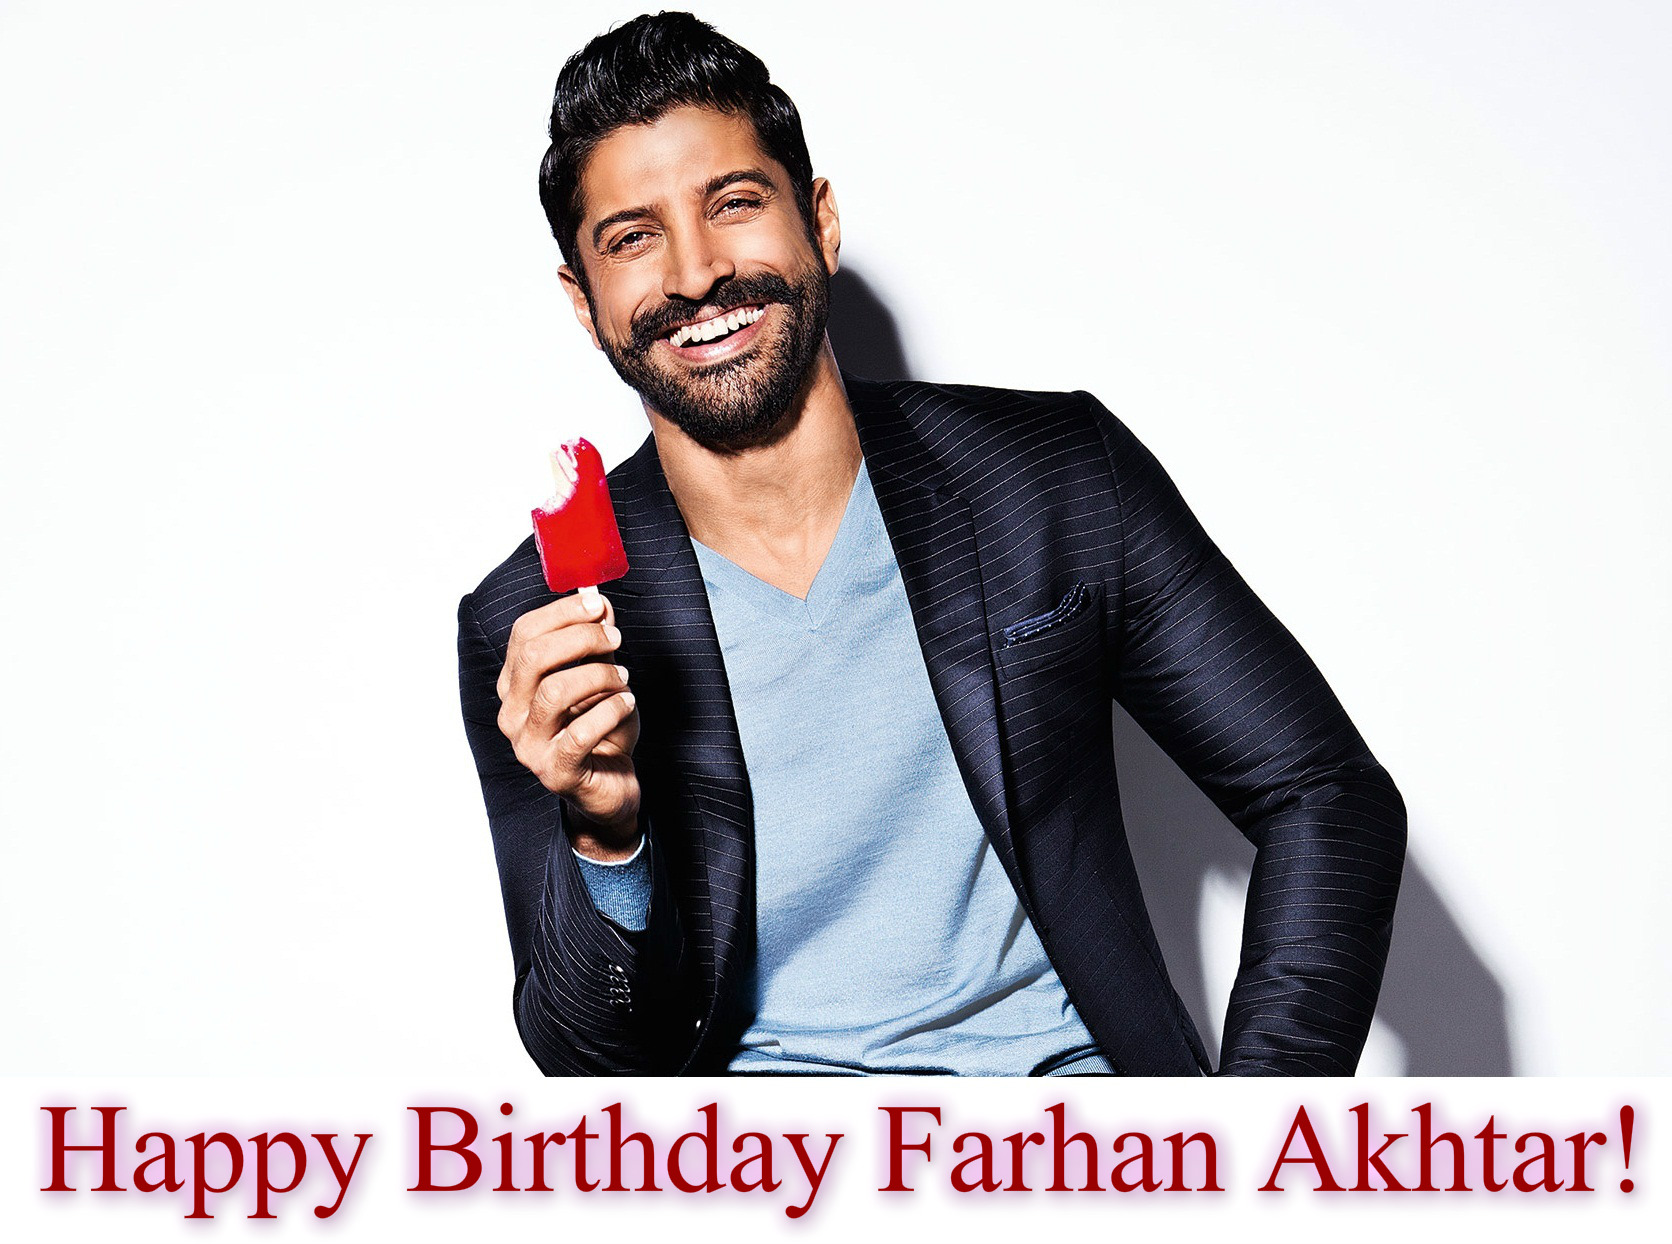 It's his birthday! These songs sung by Farhan Akhtar should be in your playlist today